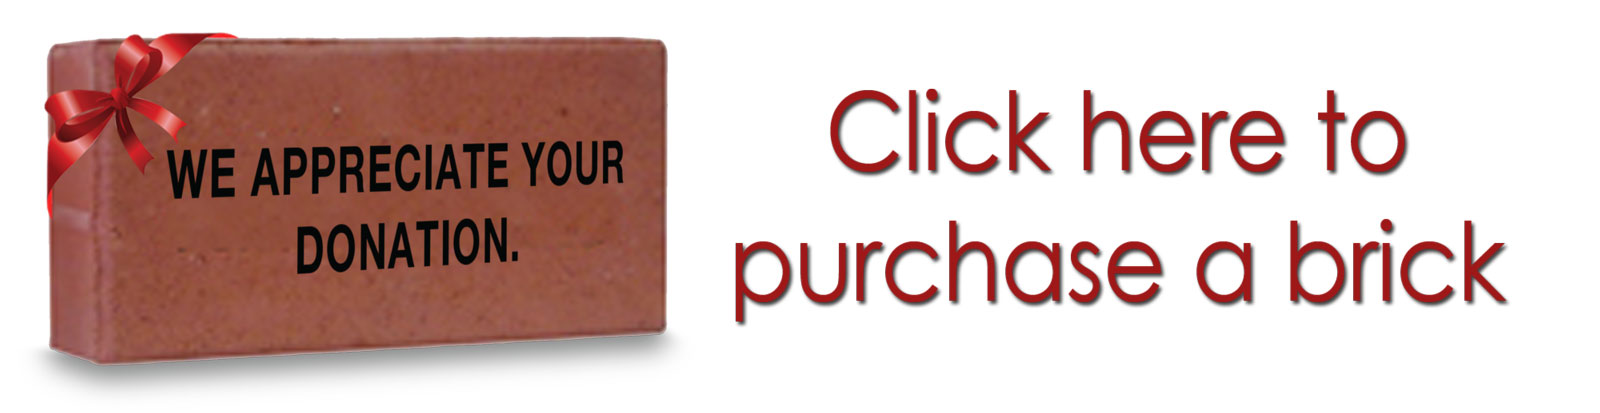 Click here to purchase a brick